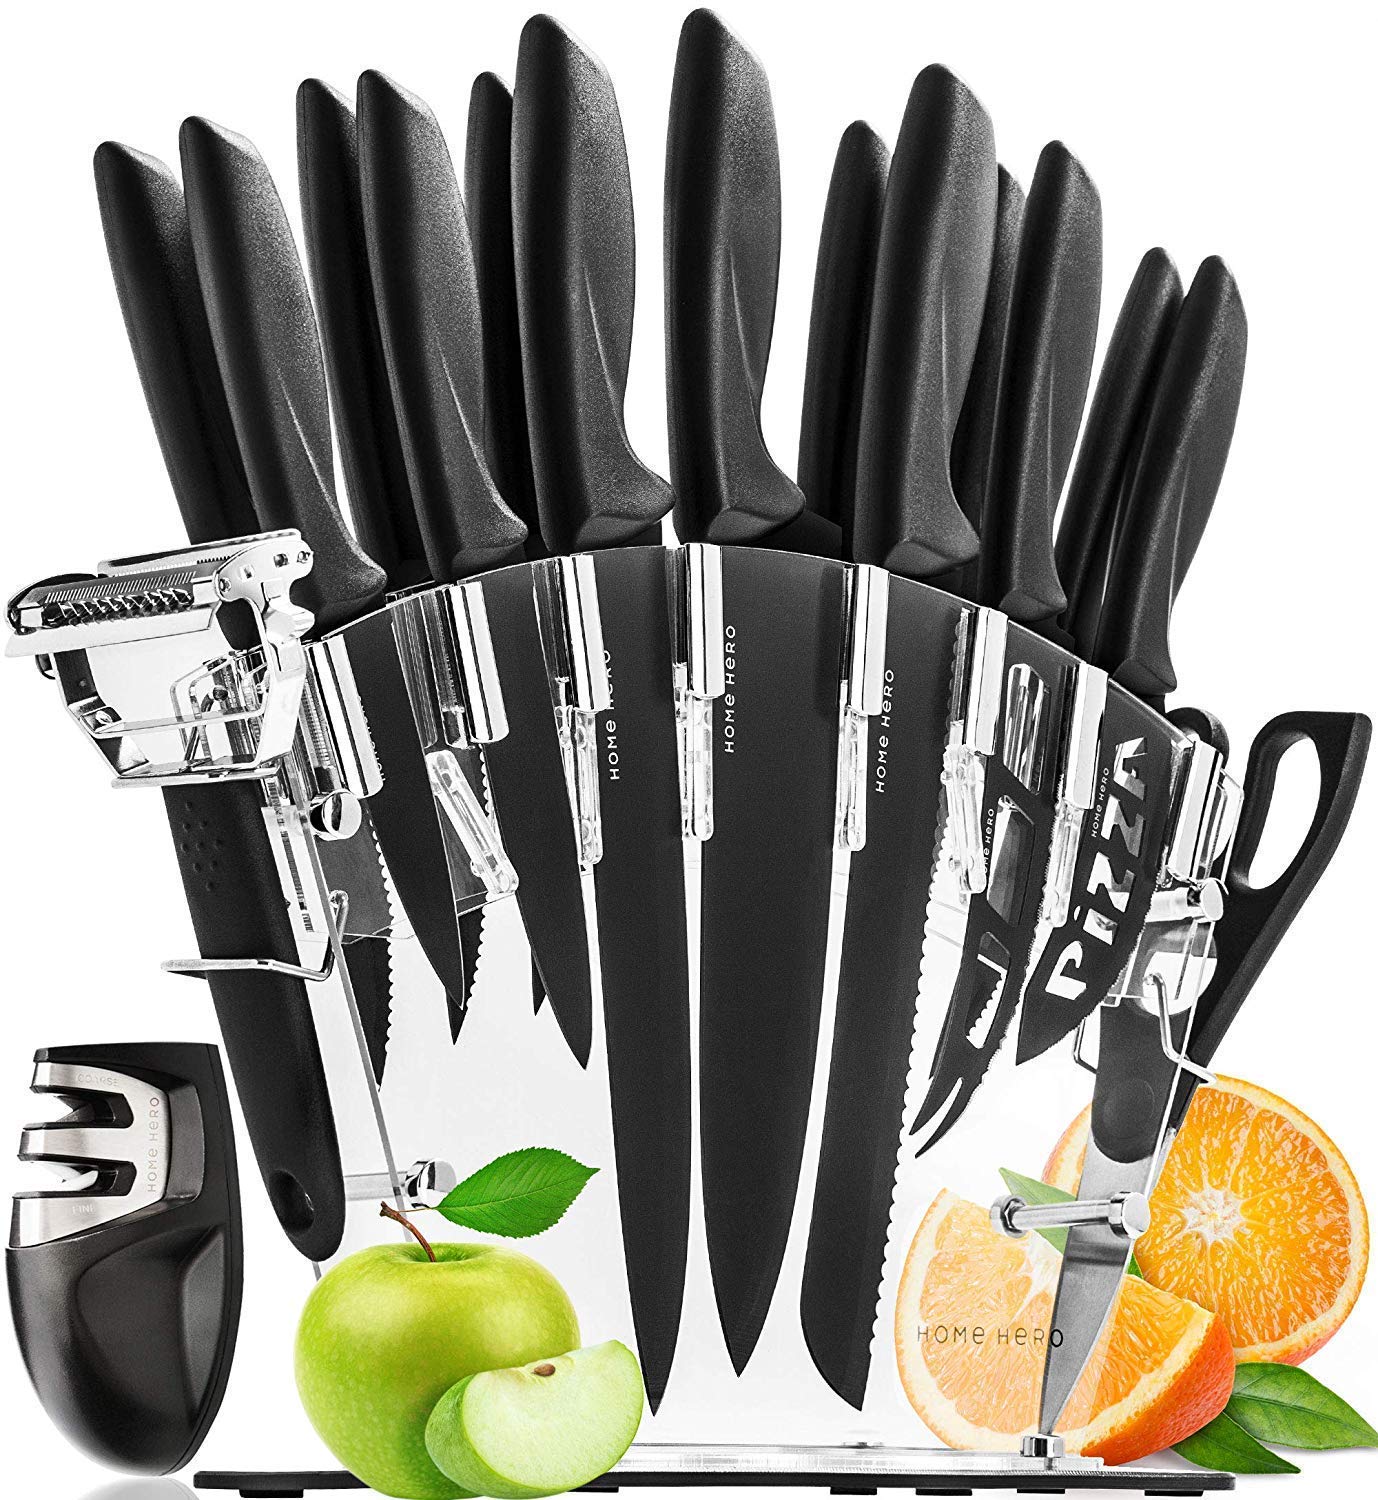 Kitchen Knife Set with Block - 13 Stainless Steel Kitchen Knives